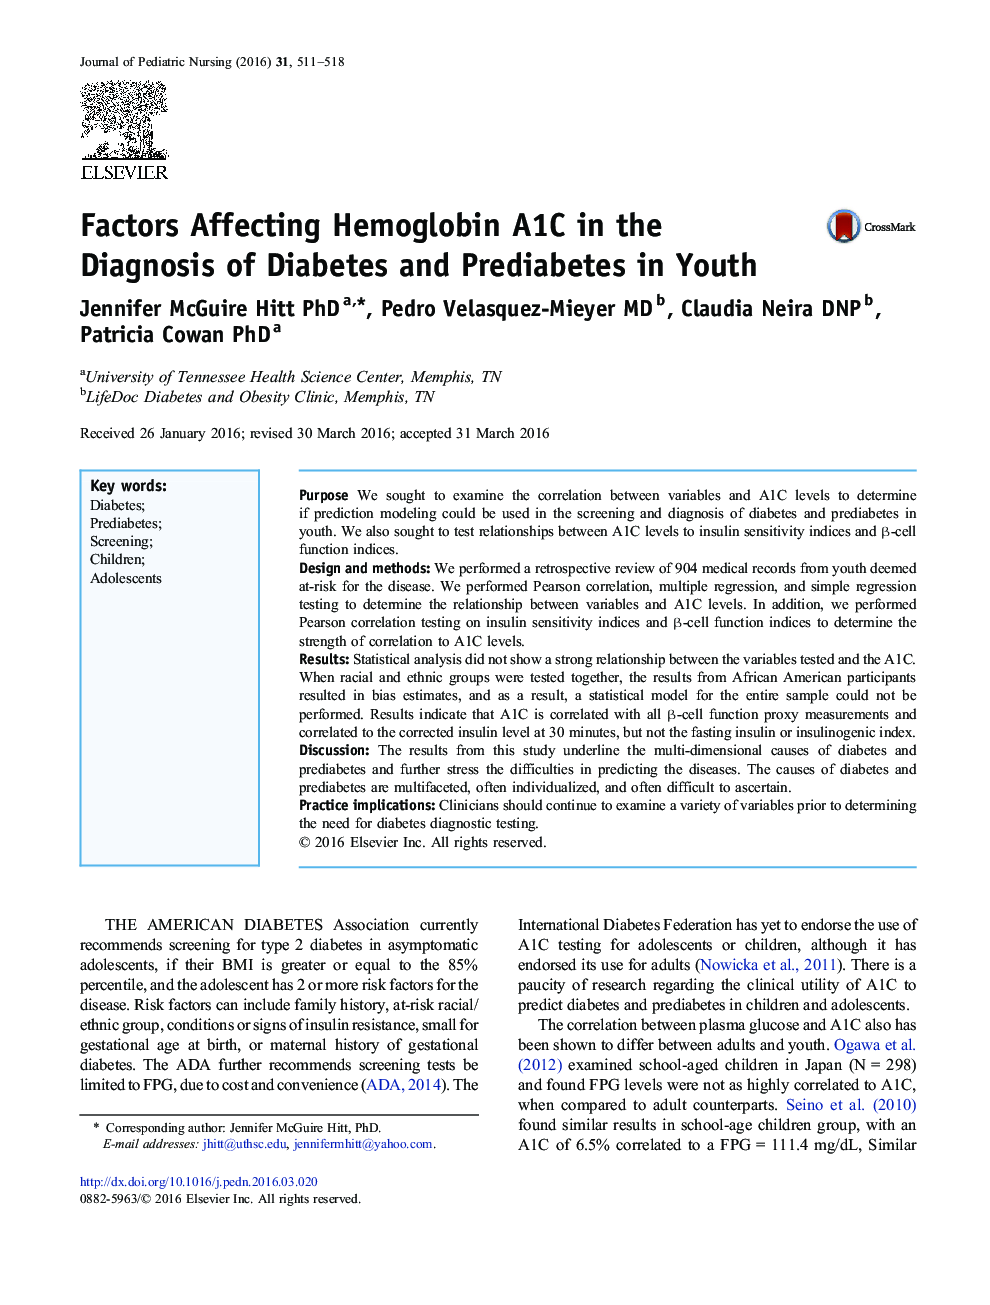 Factors Affecting Hemoglobin A1C in the Diagnosis of Diabetes and Prediabetes in Youth